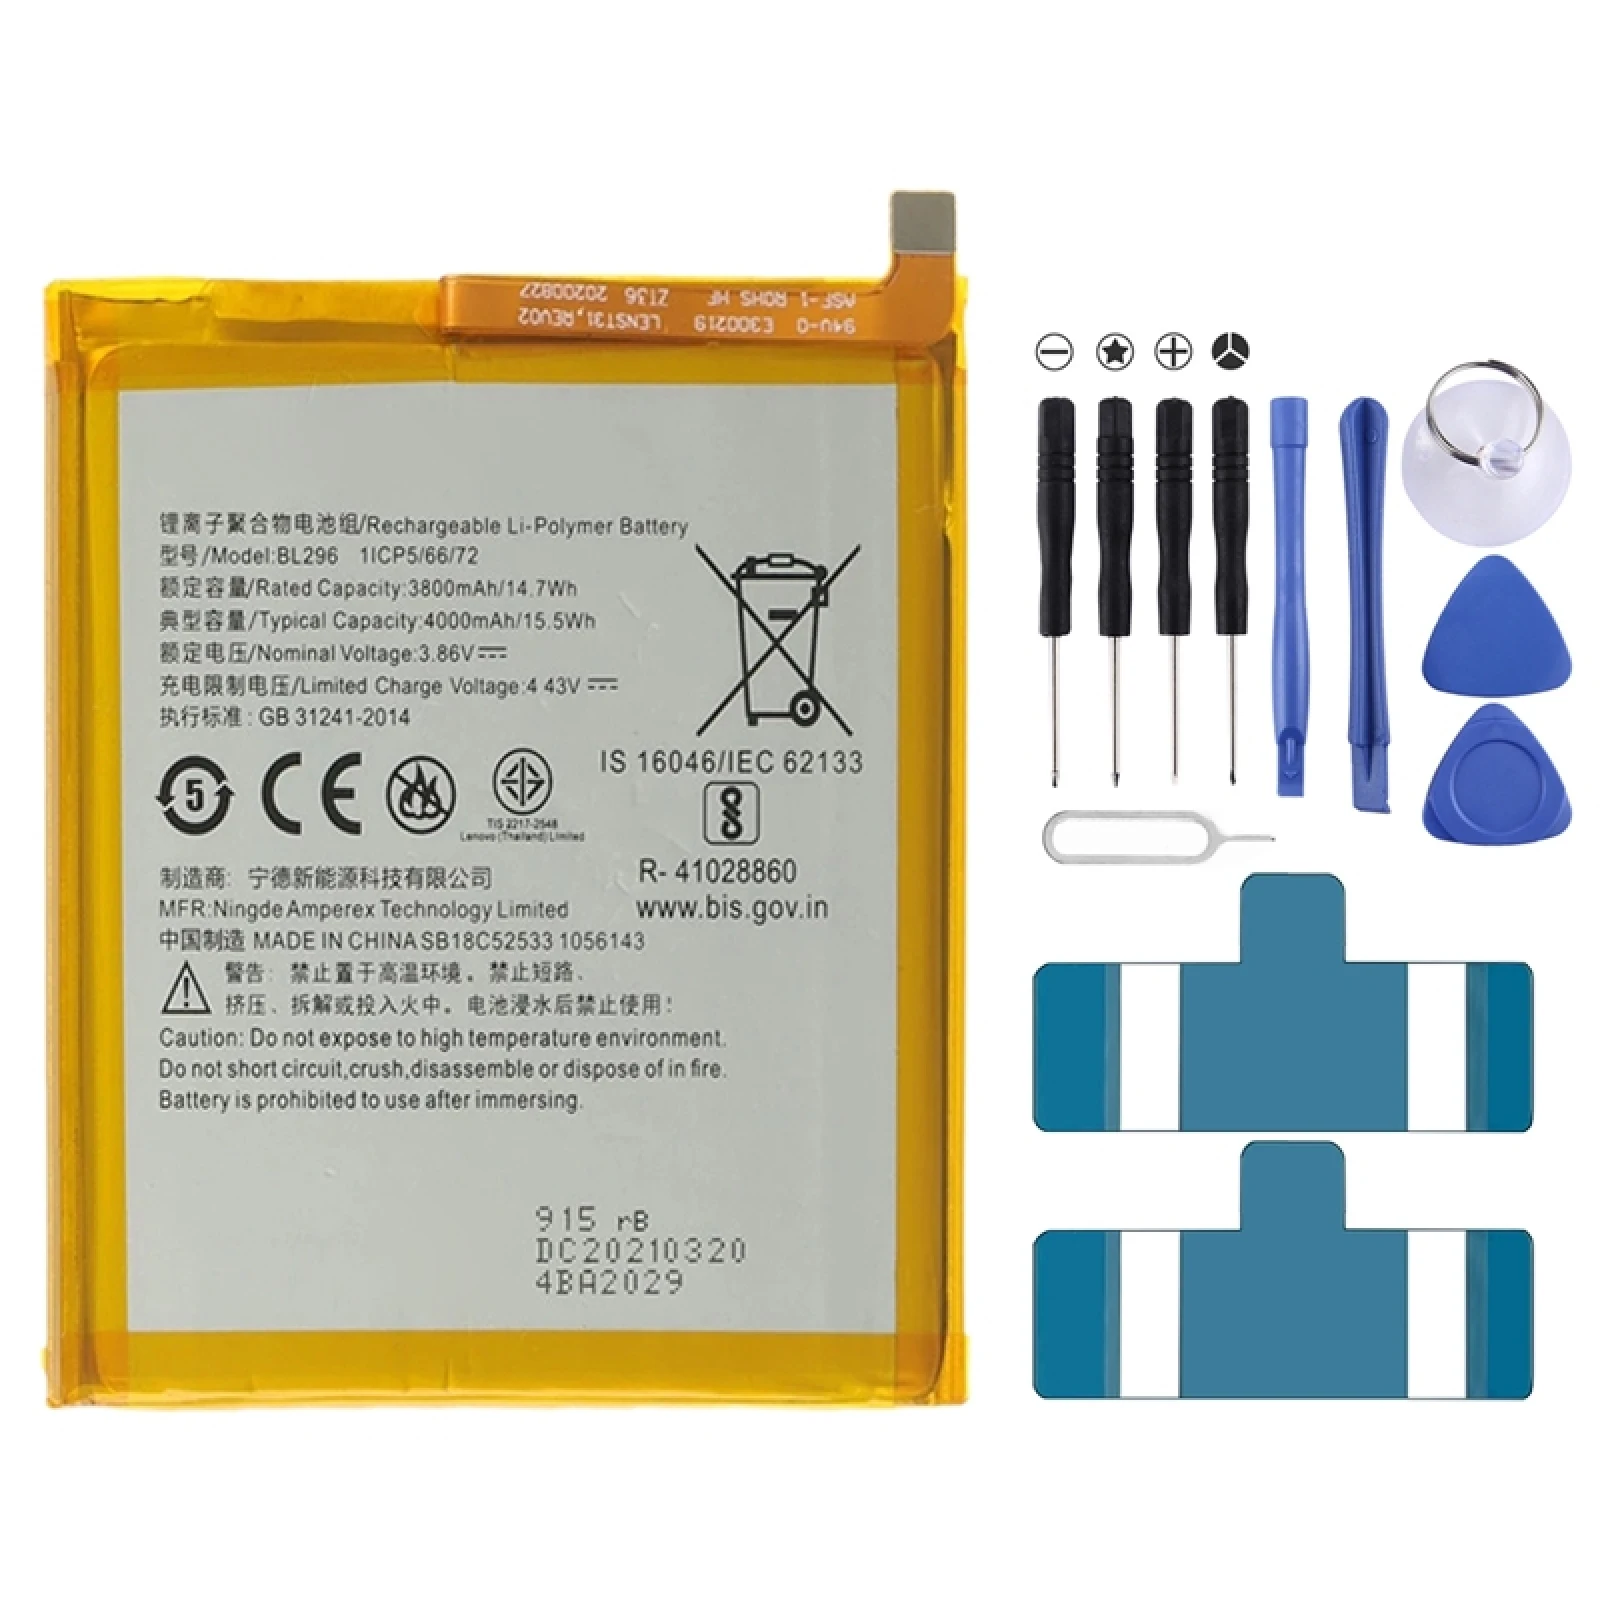 

Li-Polymer Battery Replacement For Lenovo Tab M10 TB-X505X/ZUK Edge Z2X/Z5 L78011/Vibe K4 Note A7010/K5 Play L38011/K6 Note